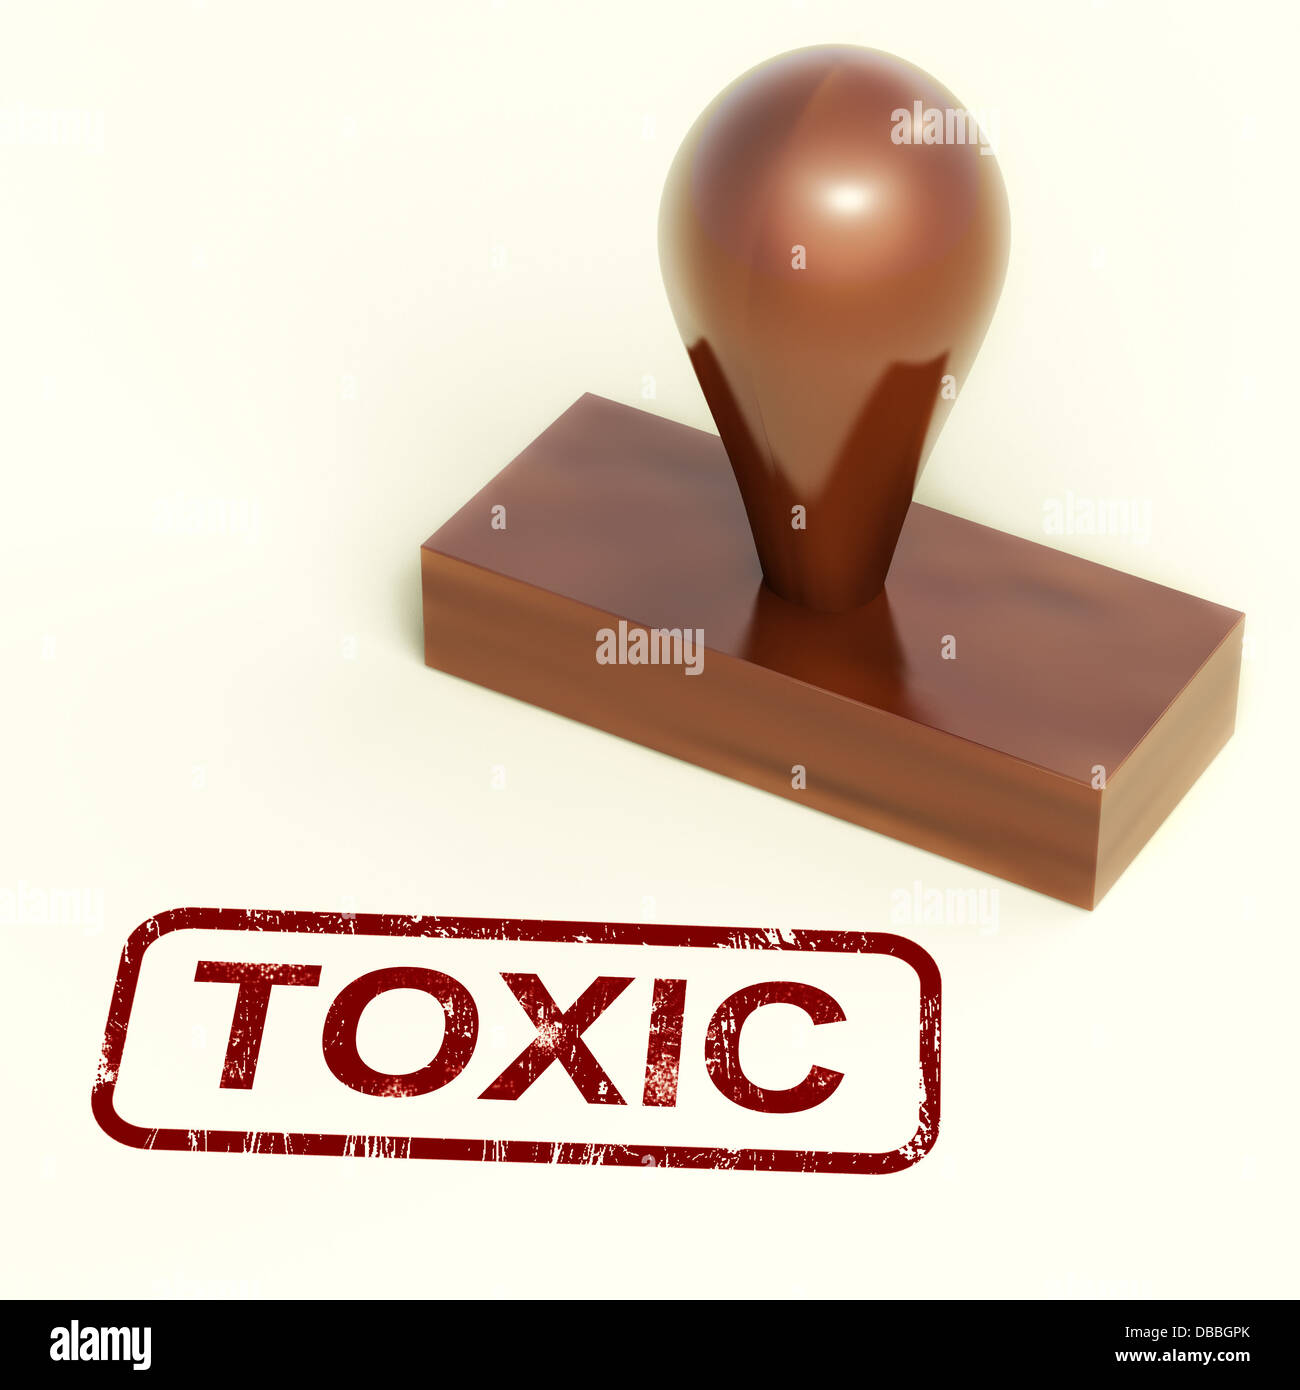 Toxic Stamp Shows Poisonous And Noxious Substances Stock Photo